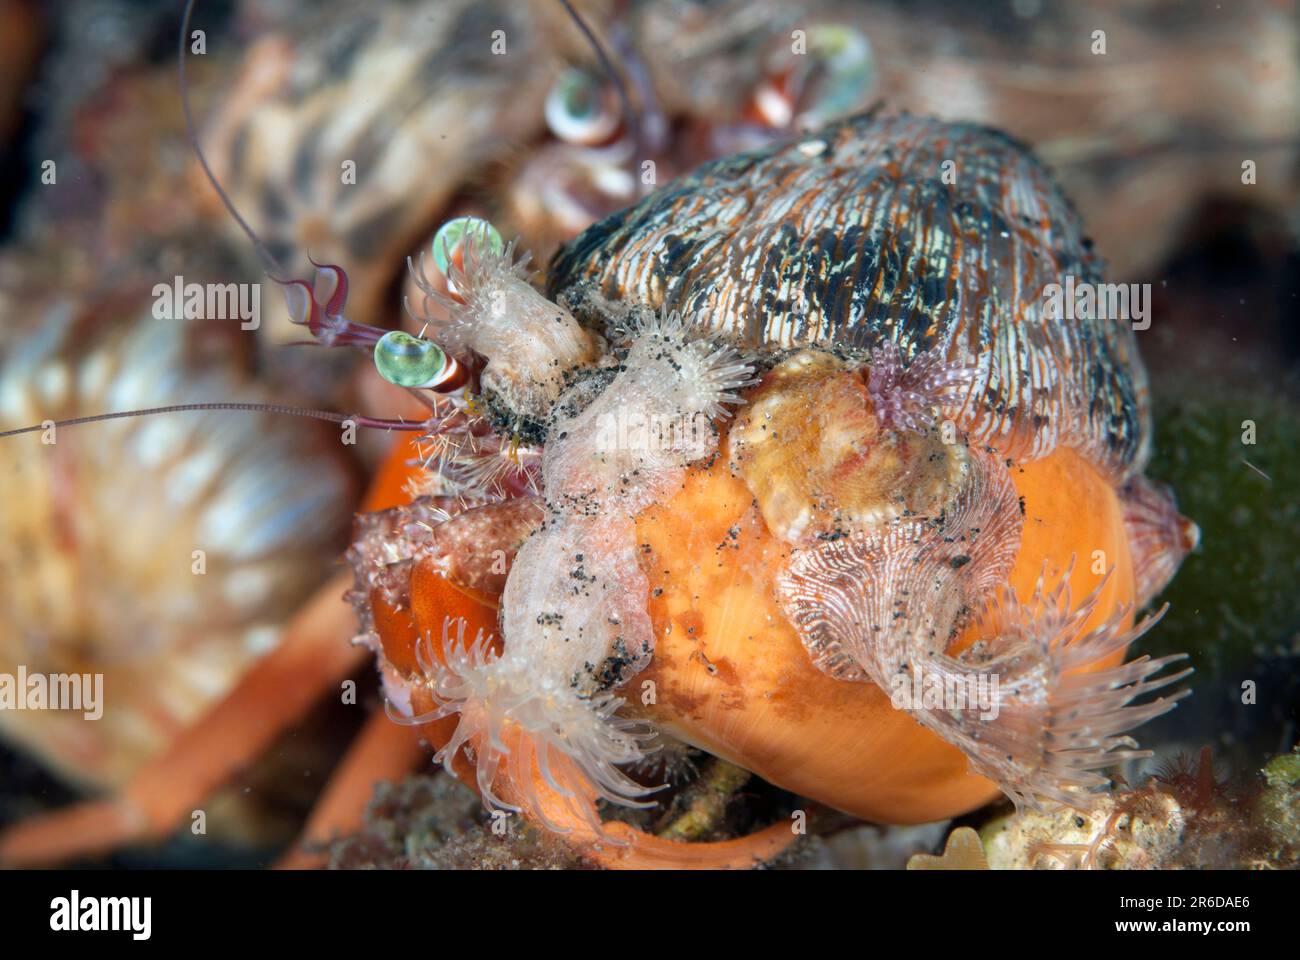 Pair of Anemone Hermit Crabs, Dardanus pedunculatus,  in shell with Sea Anemones, Calliactis polypus, on shell for camouflage and protection, Aer Pran Stock Photo